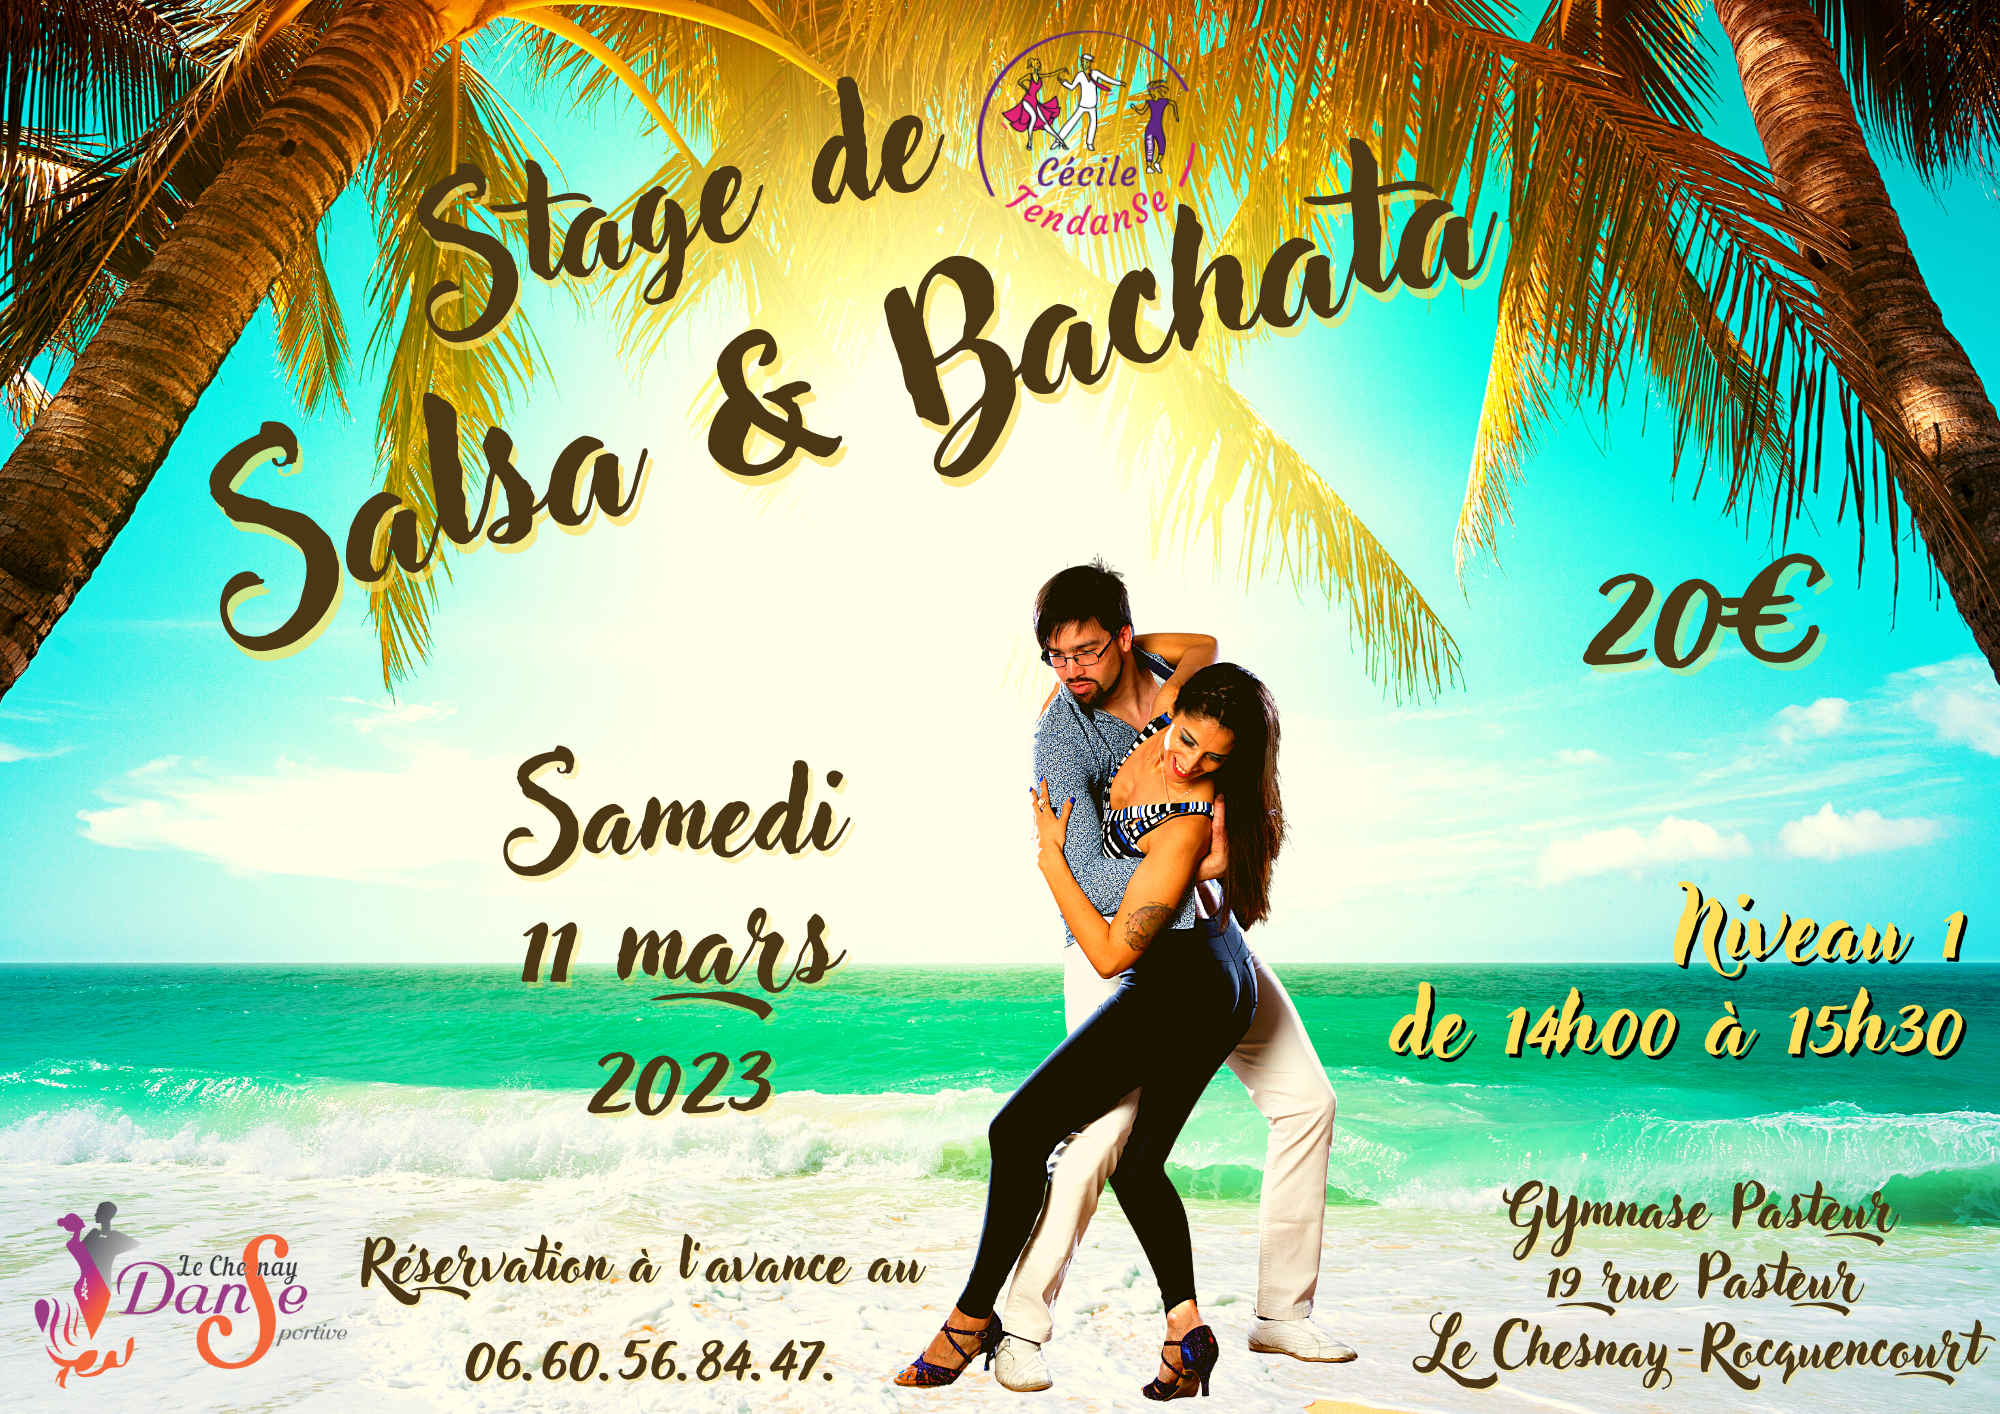 You are currently viewing SALSA BACHATA NIVEAU 1 – 11 MARS 2023